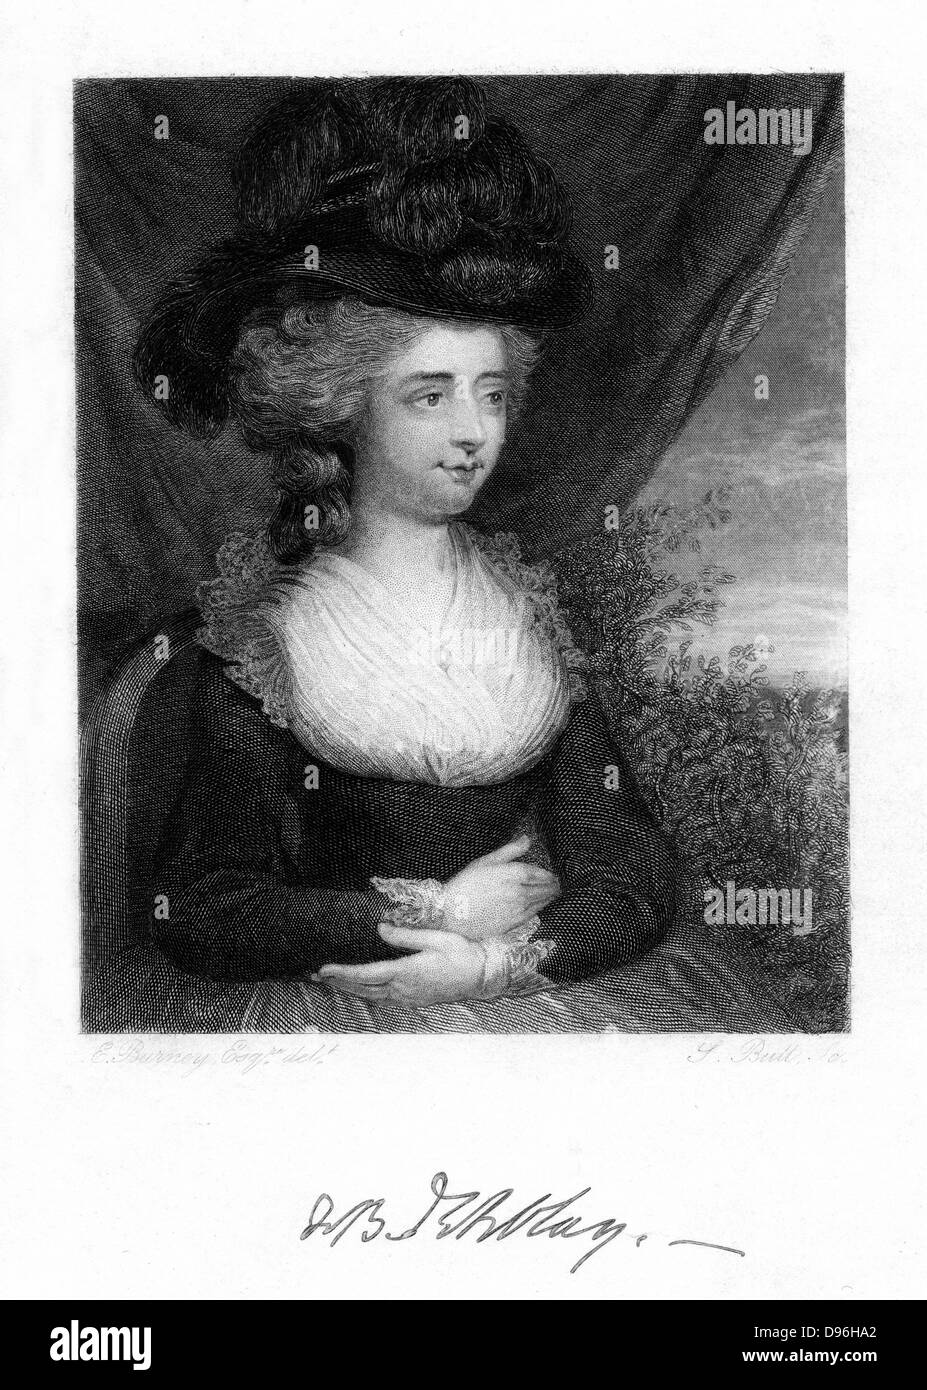 Fanny (Frances) Burney, Madame D'Arblay (1752-1840) English novelist, 1843.  Daughter of the musicologist Dr Charles Burney, in 1793 she married General d'Arblay, a French refugee. Her three major novels are 'Evelina' (1778), 'Cecilia' (1782) and 'Camilla' (1796). From 'Diary and Letters of Madame D'Arblay' by Fanny Burney. ( London, 1843). Stock Photo